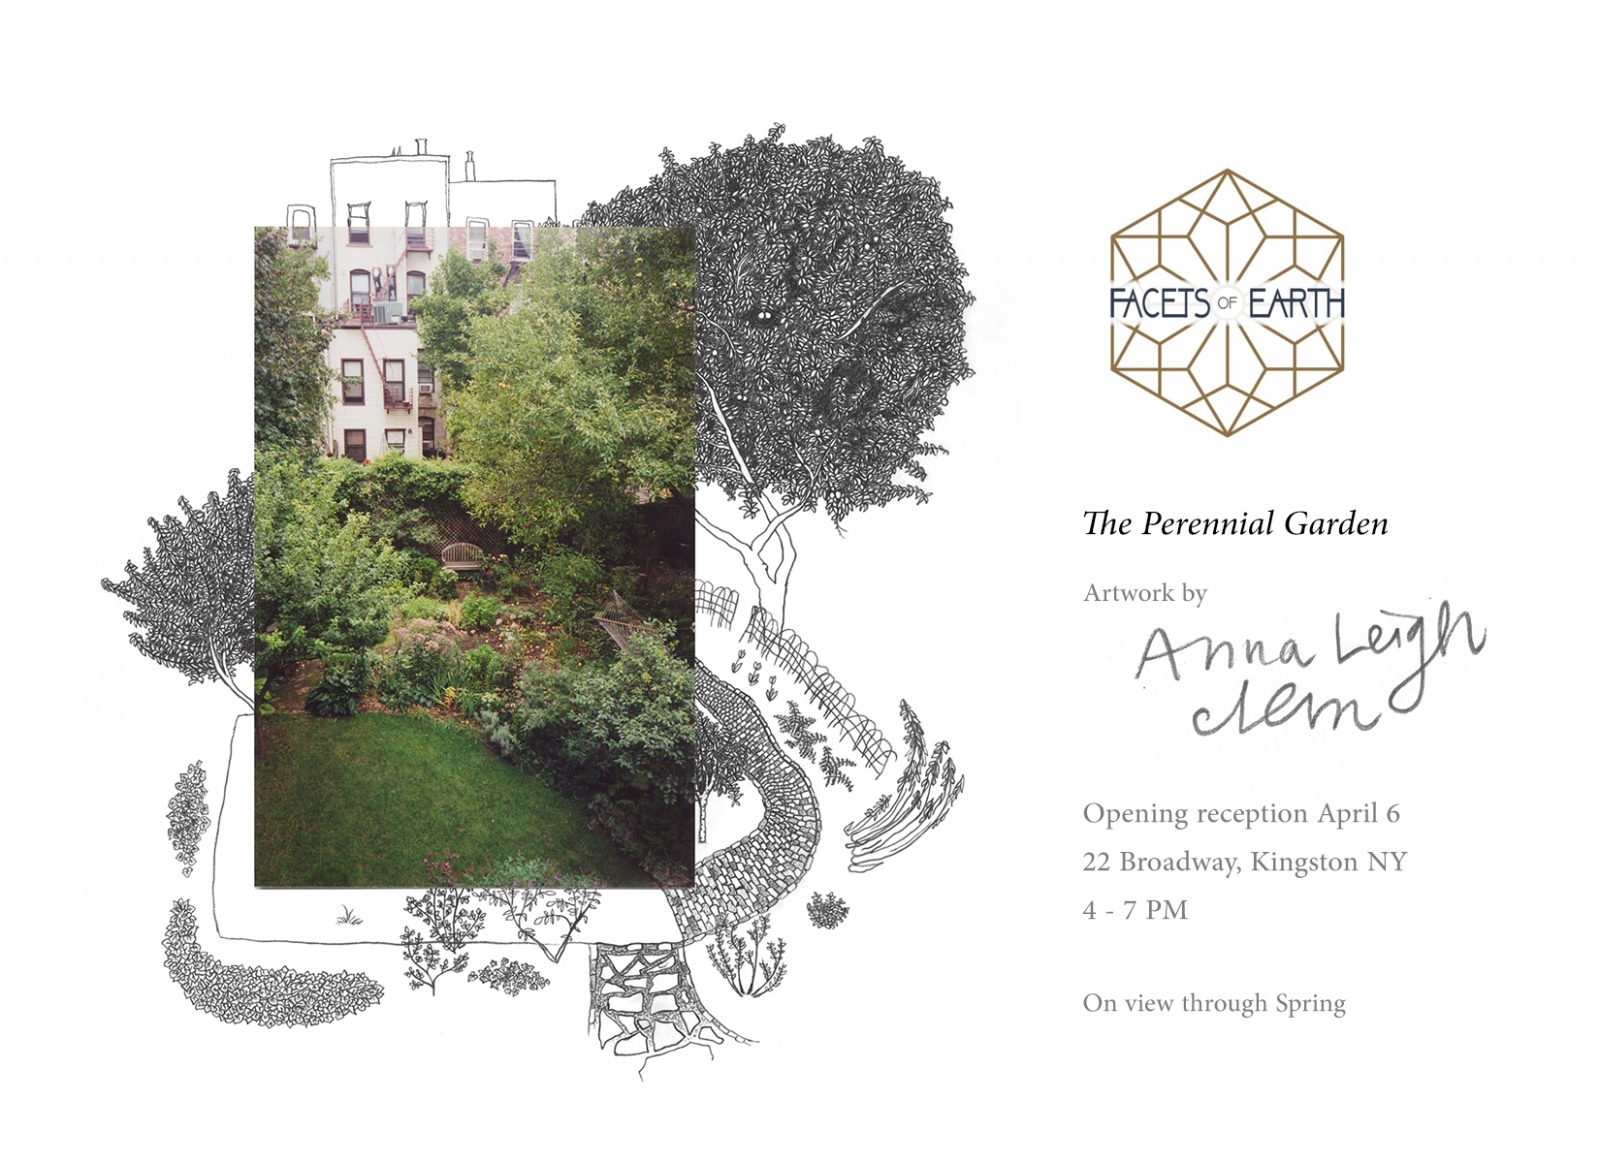 Thumbnail of The Perennial Garden at Facets of Earth